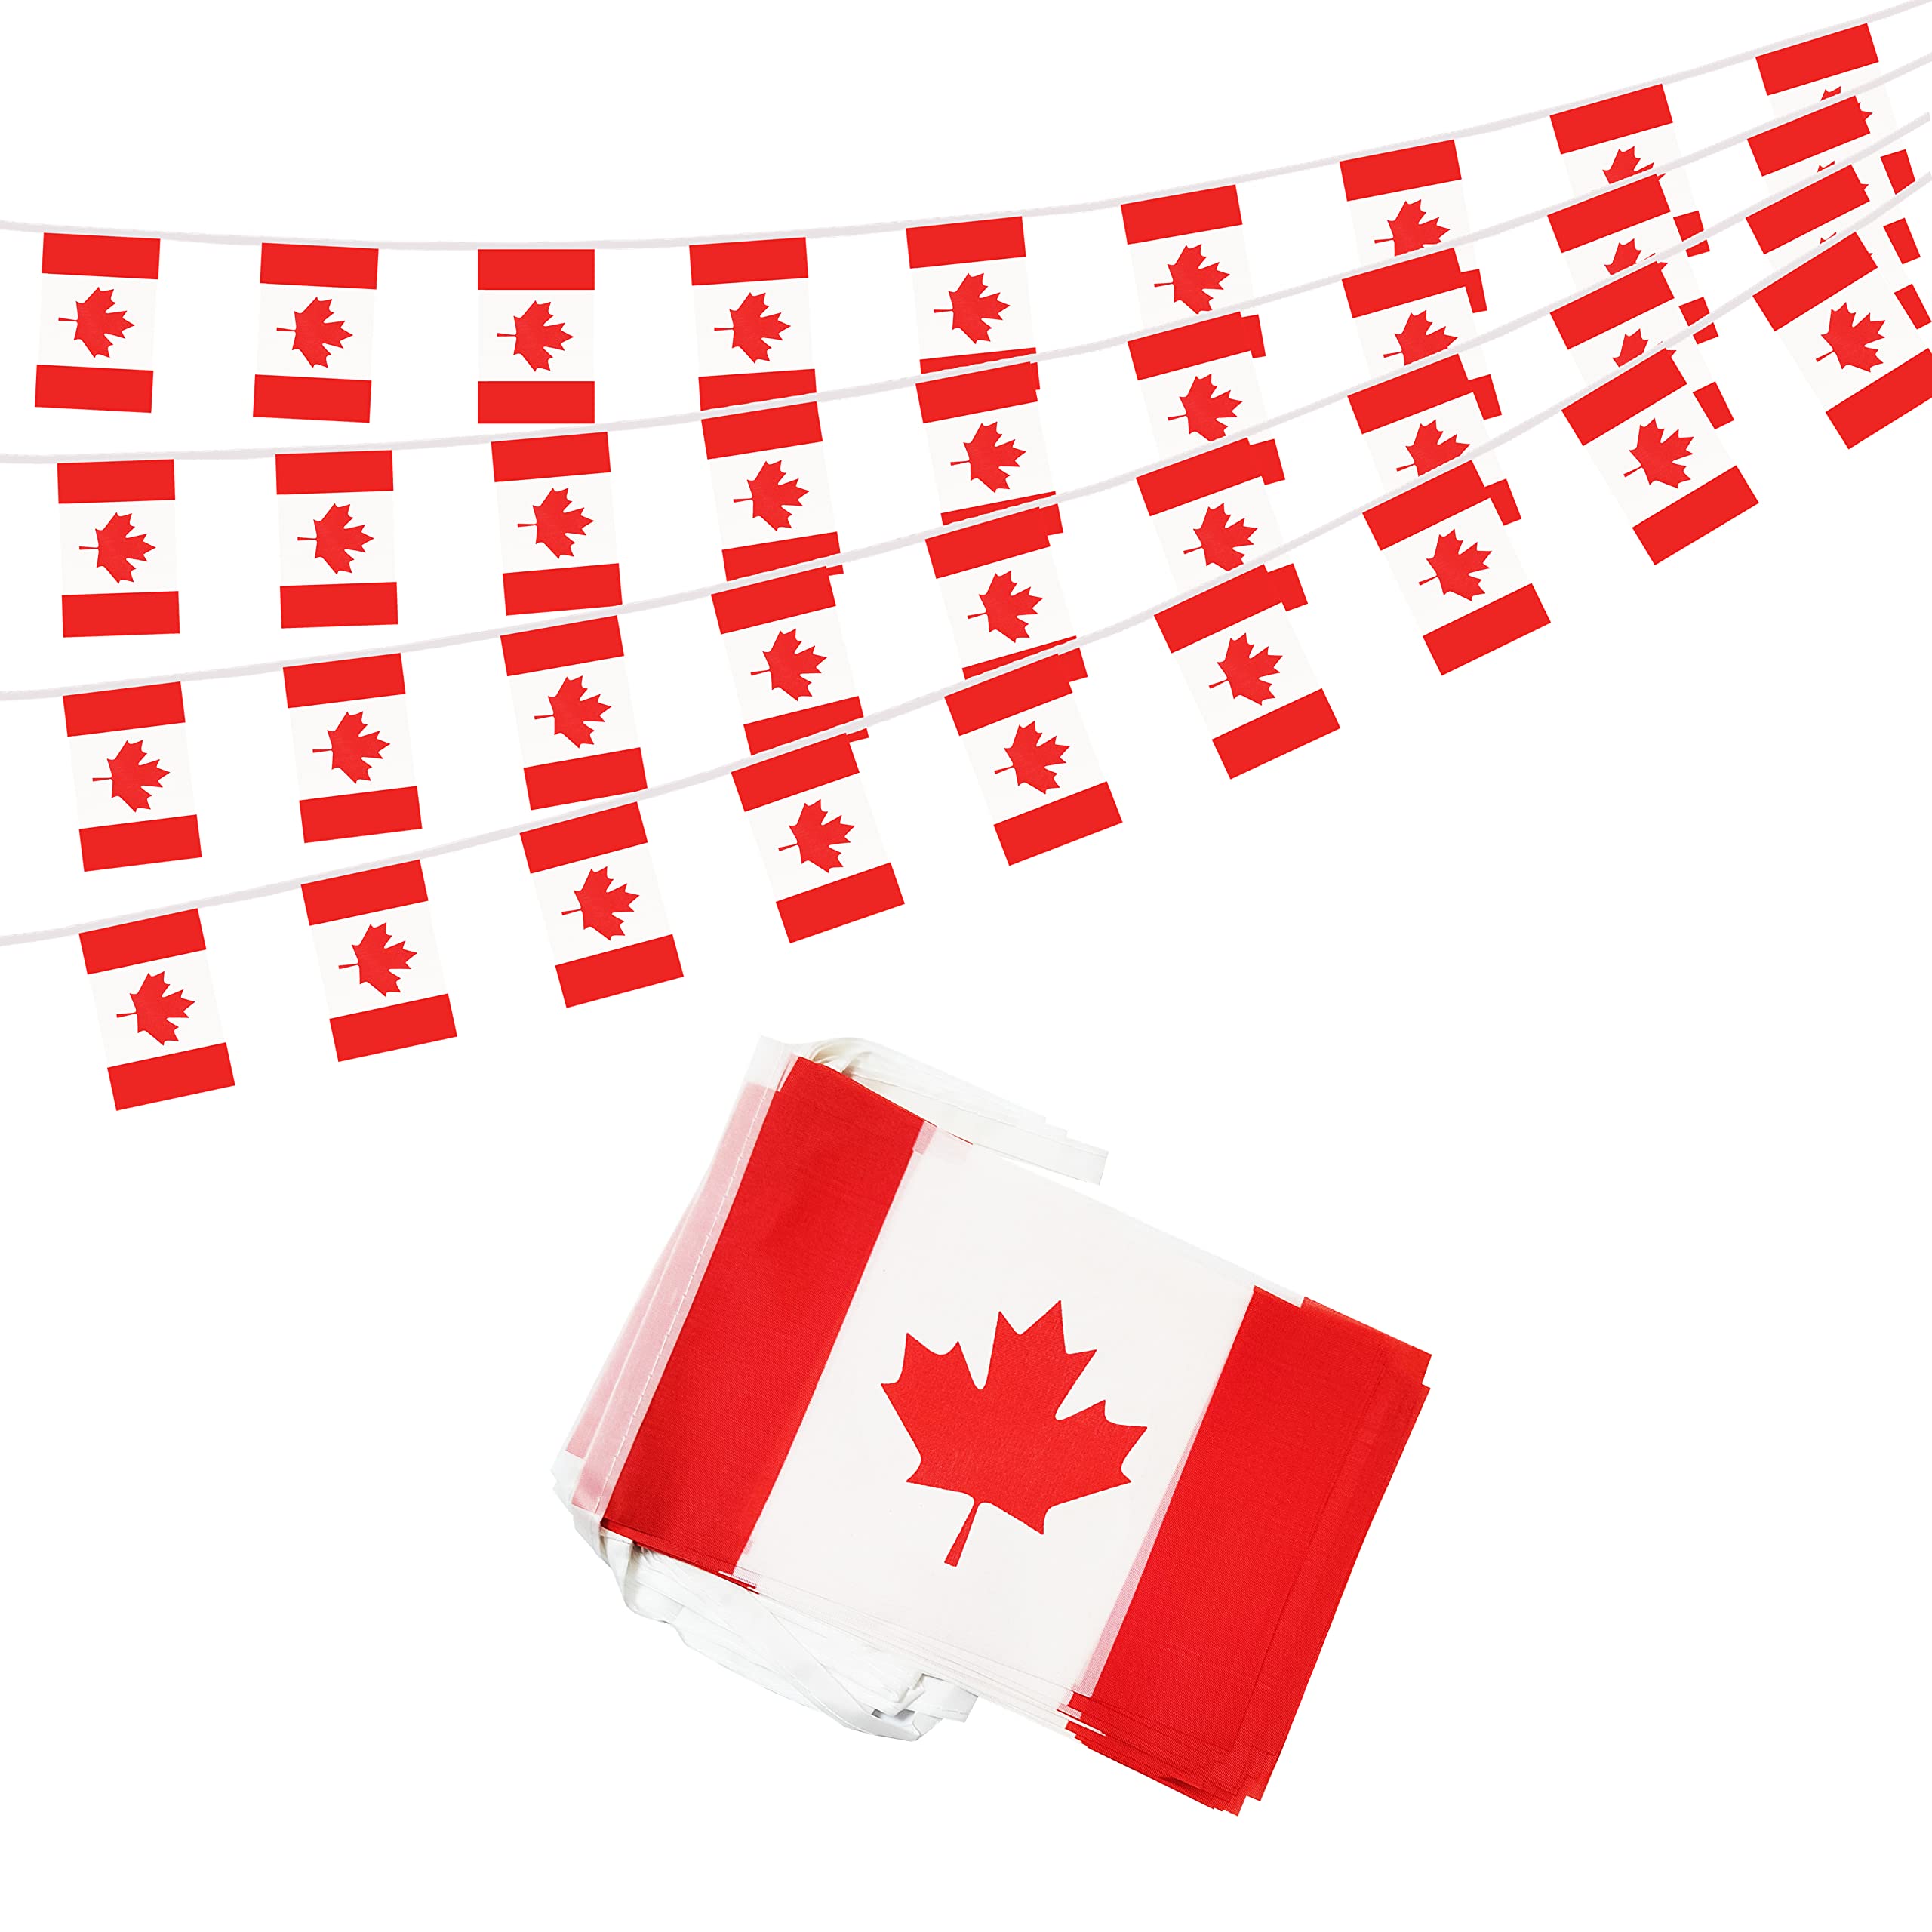 BCLin 50 Feet Canada Banner Flag String, Canadian Mini Flag Small Banner, For Olympics, World Cup, Party, Shops And Bars Decorations,